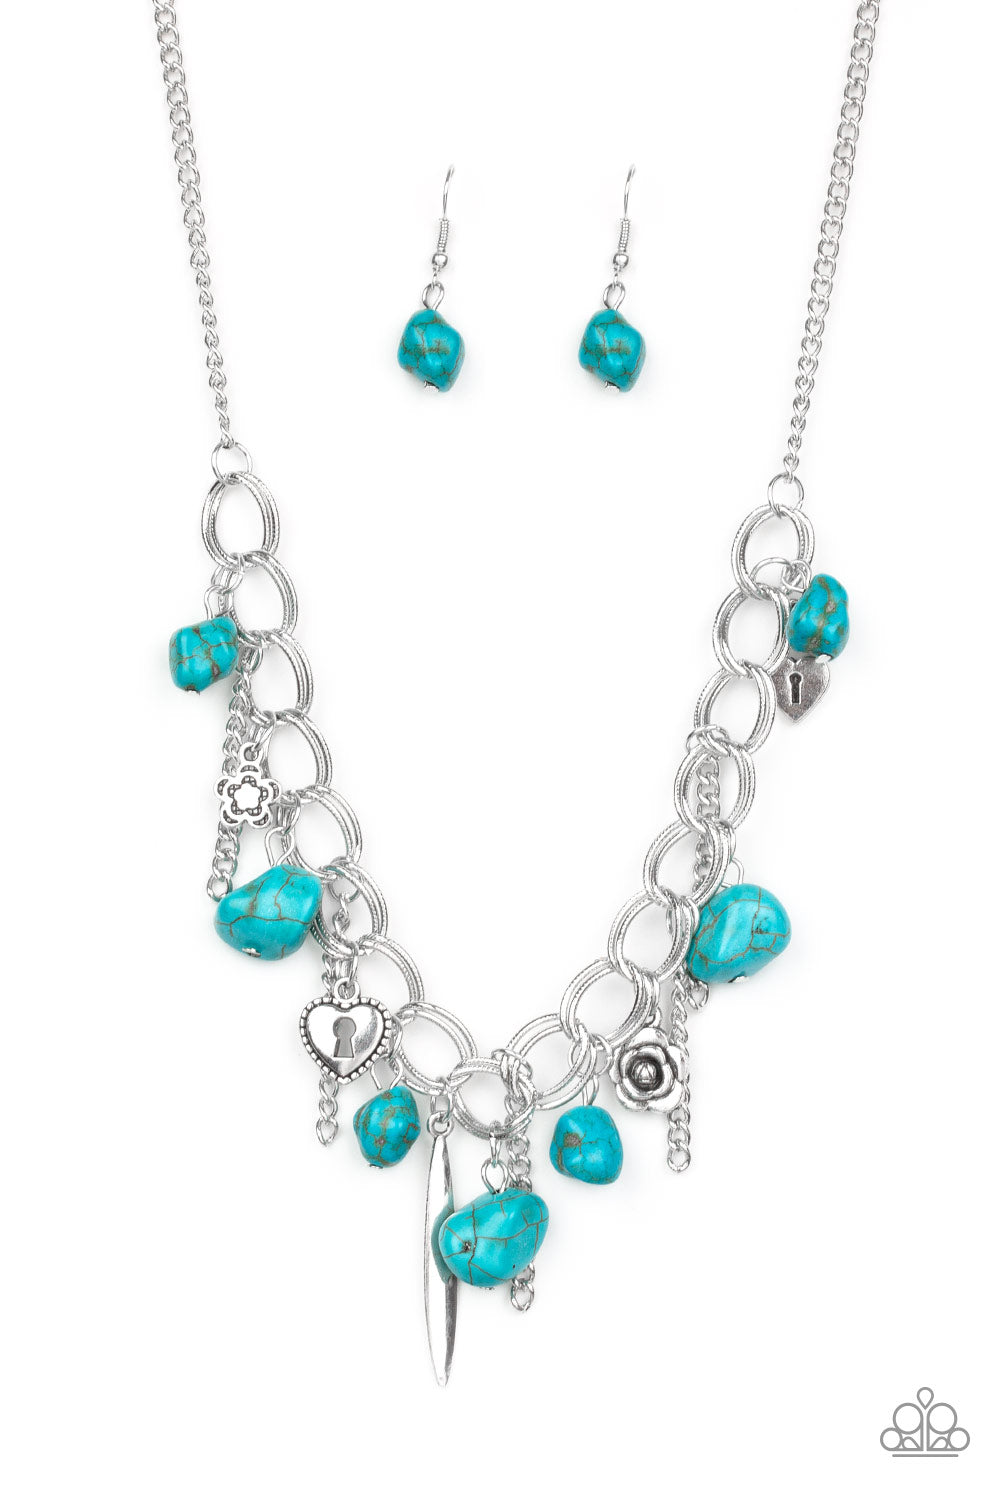 SOUTHERN SWEETHEART - TURQUOISE NECKLACE